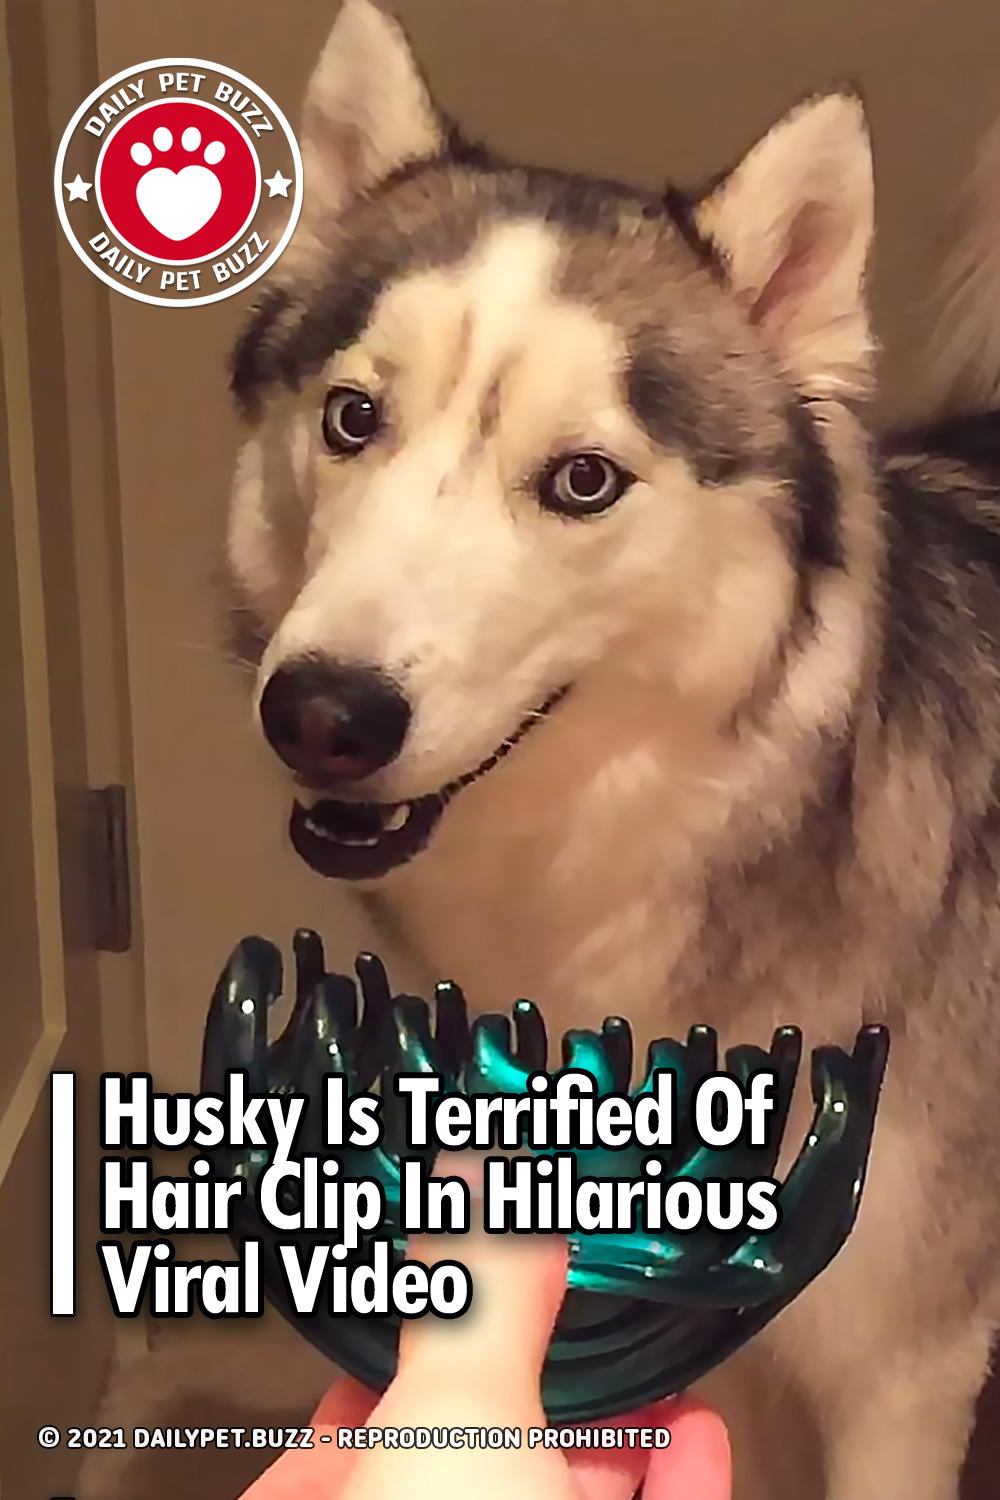 Husky Is Terrified Of Hair Clip In Hilarious Viral Video